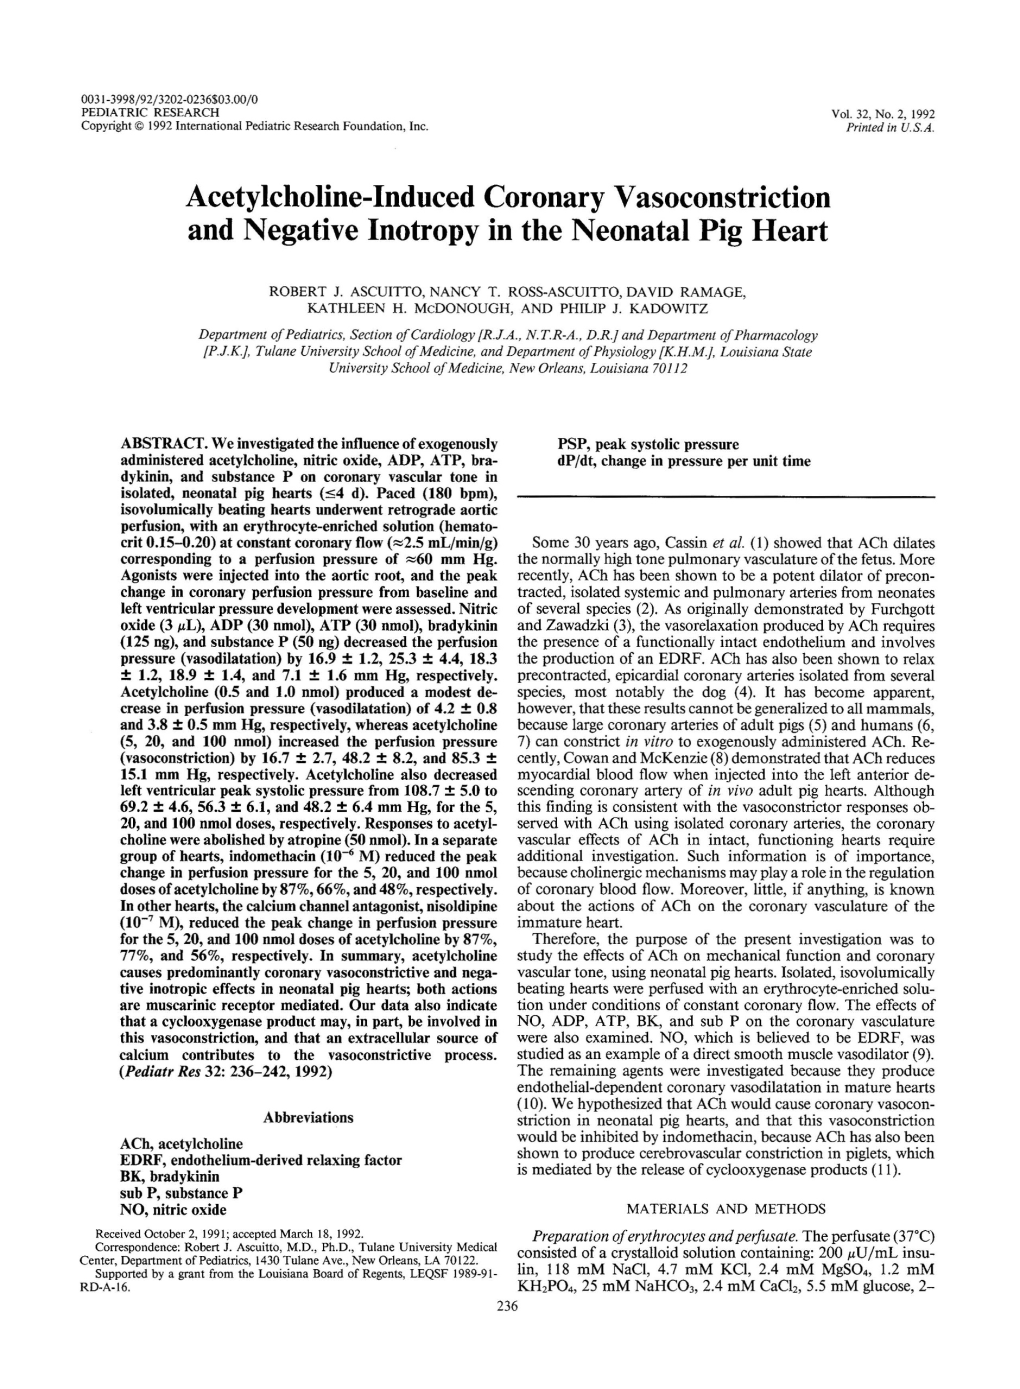 Acetylcholine-Induced Coronary Vasoconstriction and Negative Inotropy in the Neonatal Pig Heart